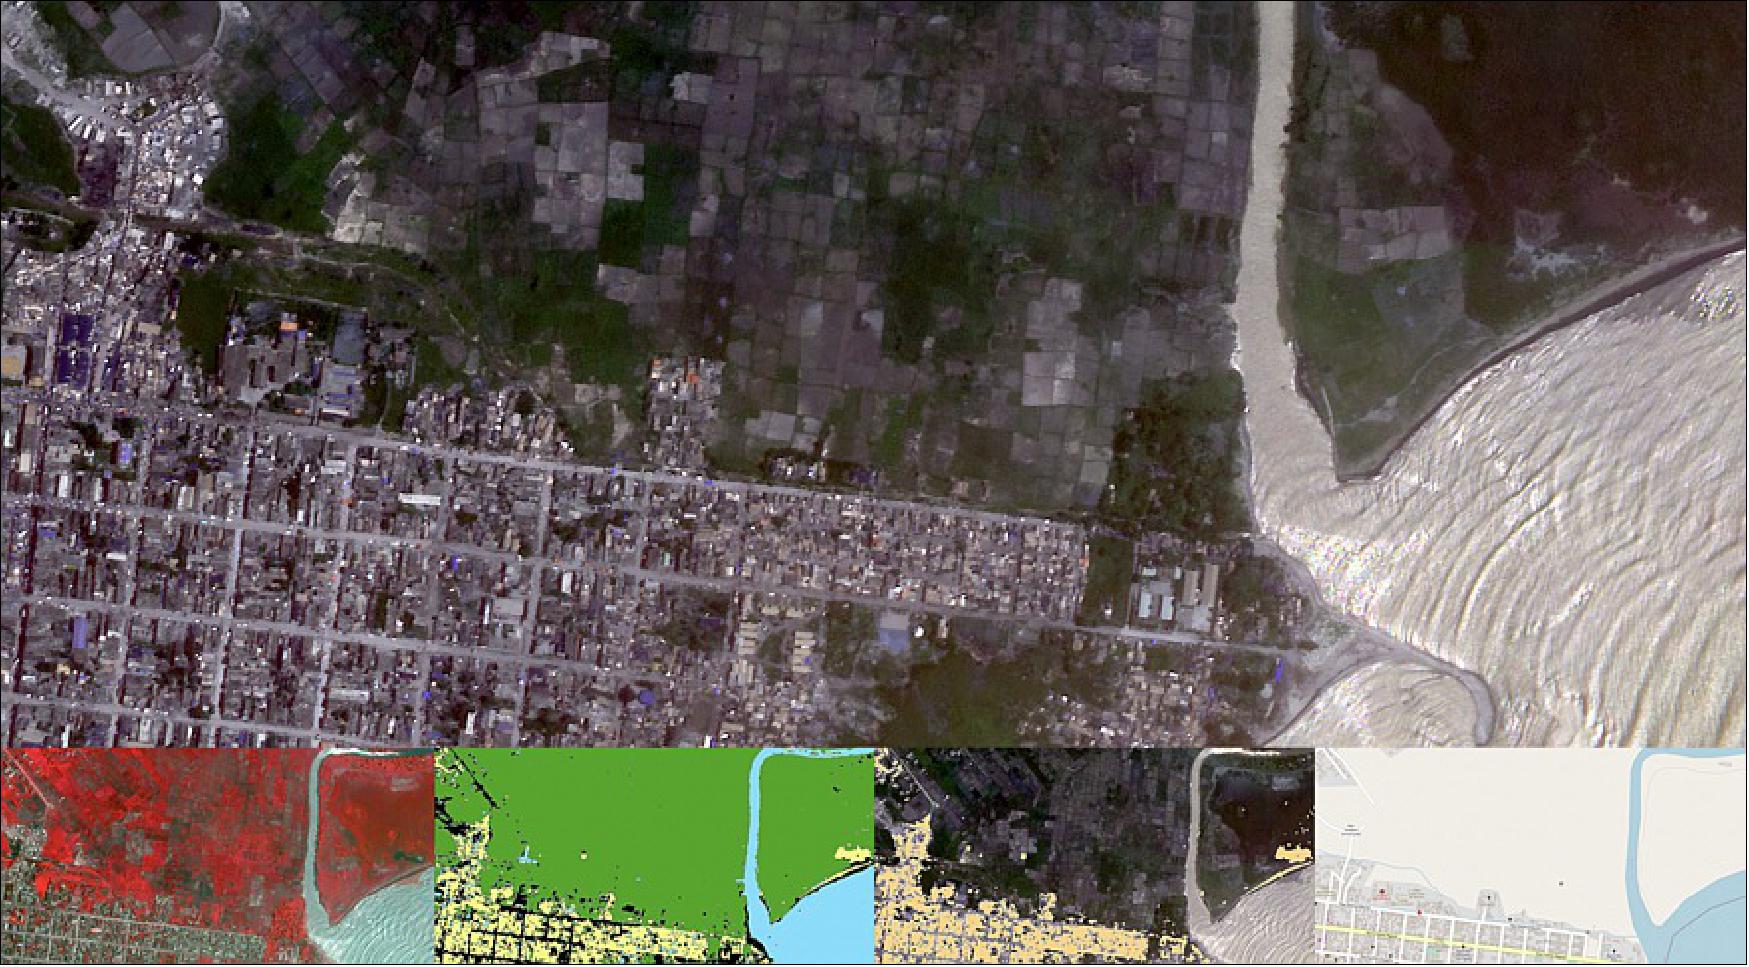 Figure 6: Satellogic uses satellite imagery and analytics software to assess flood risks in Les Cayes, Haiti, in August 2021 (image credit: Satellogic)